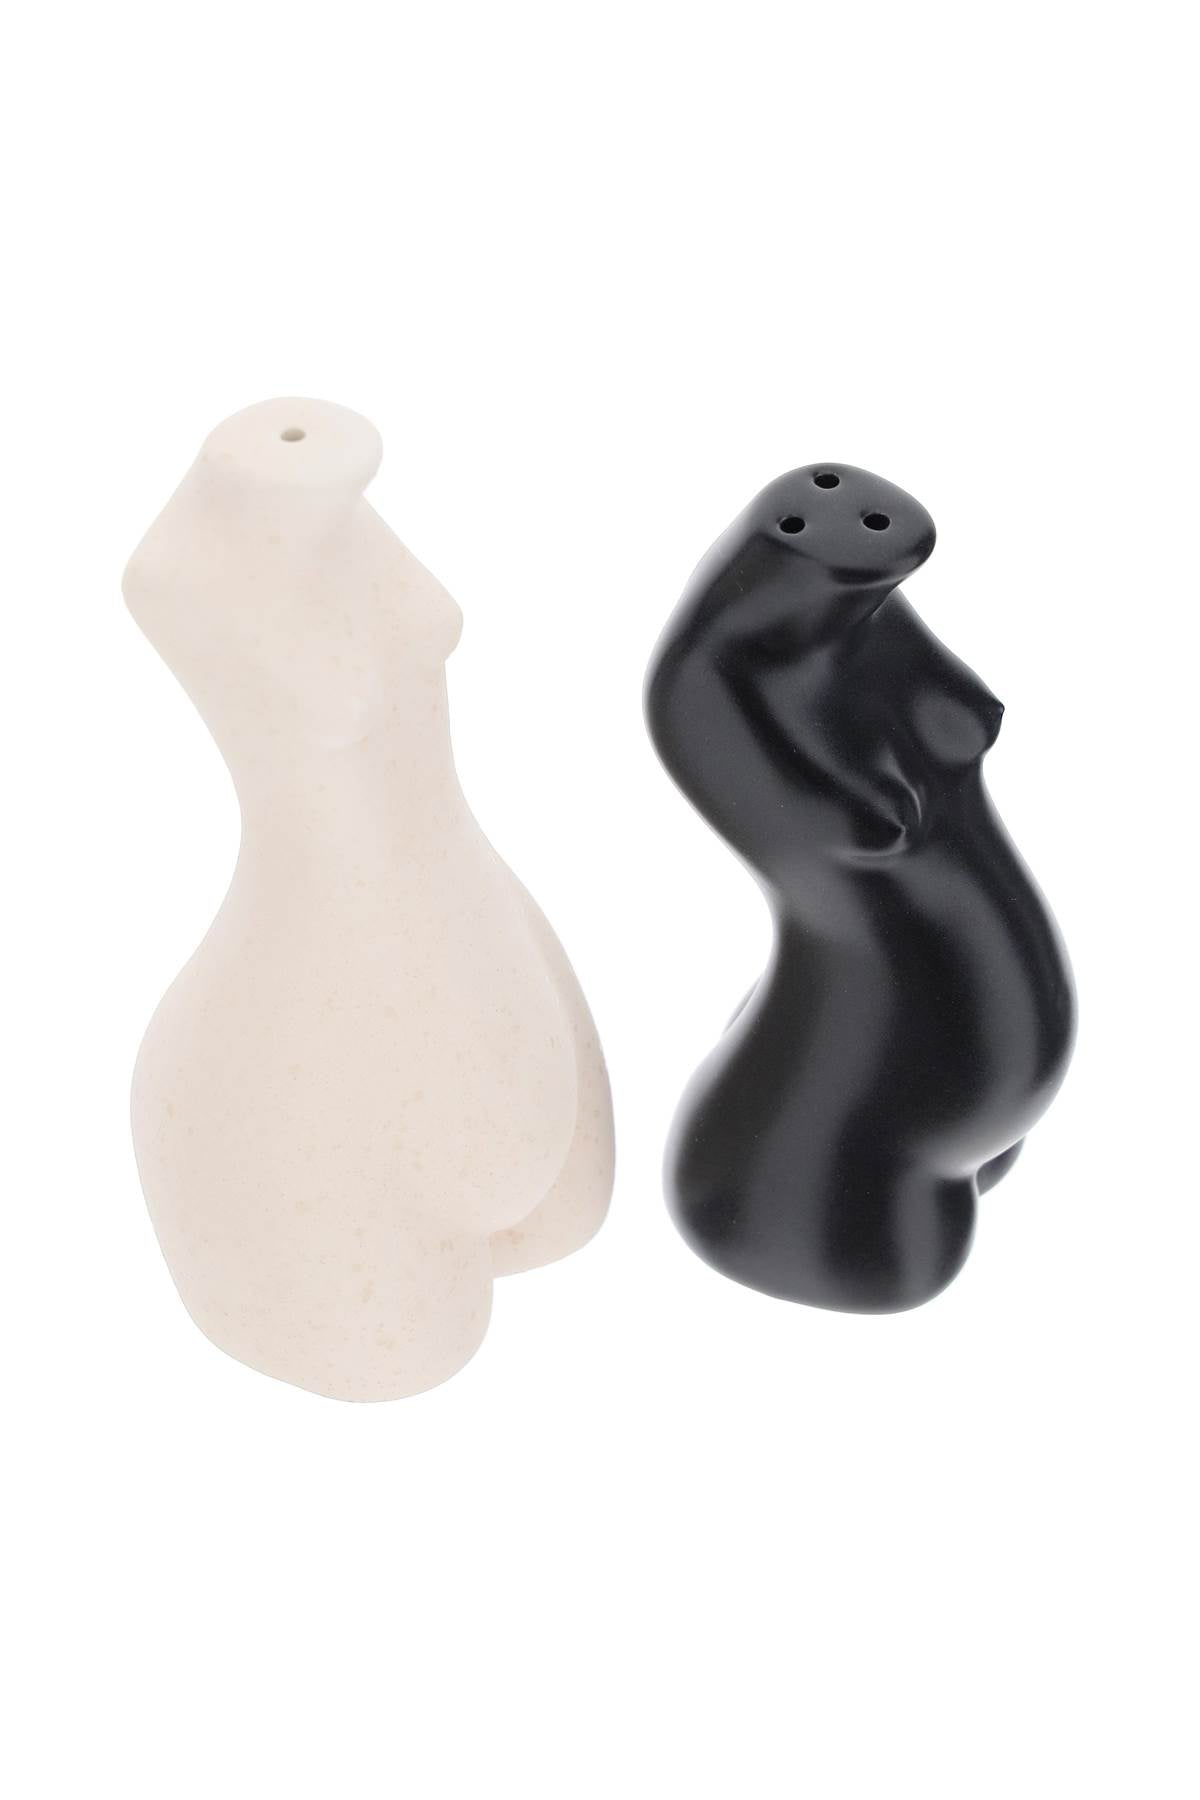 Anissa kermiche body salt and pepper shakers-2